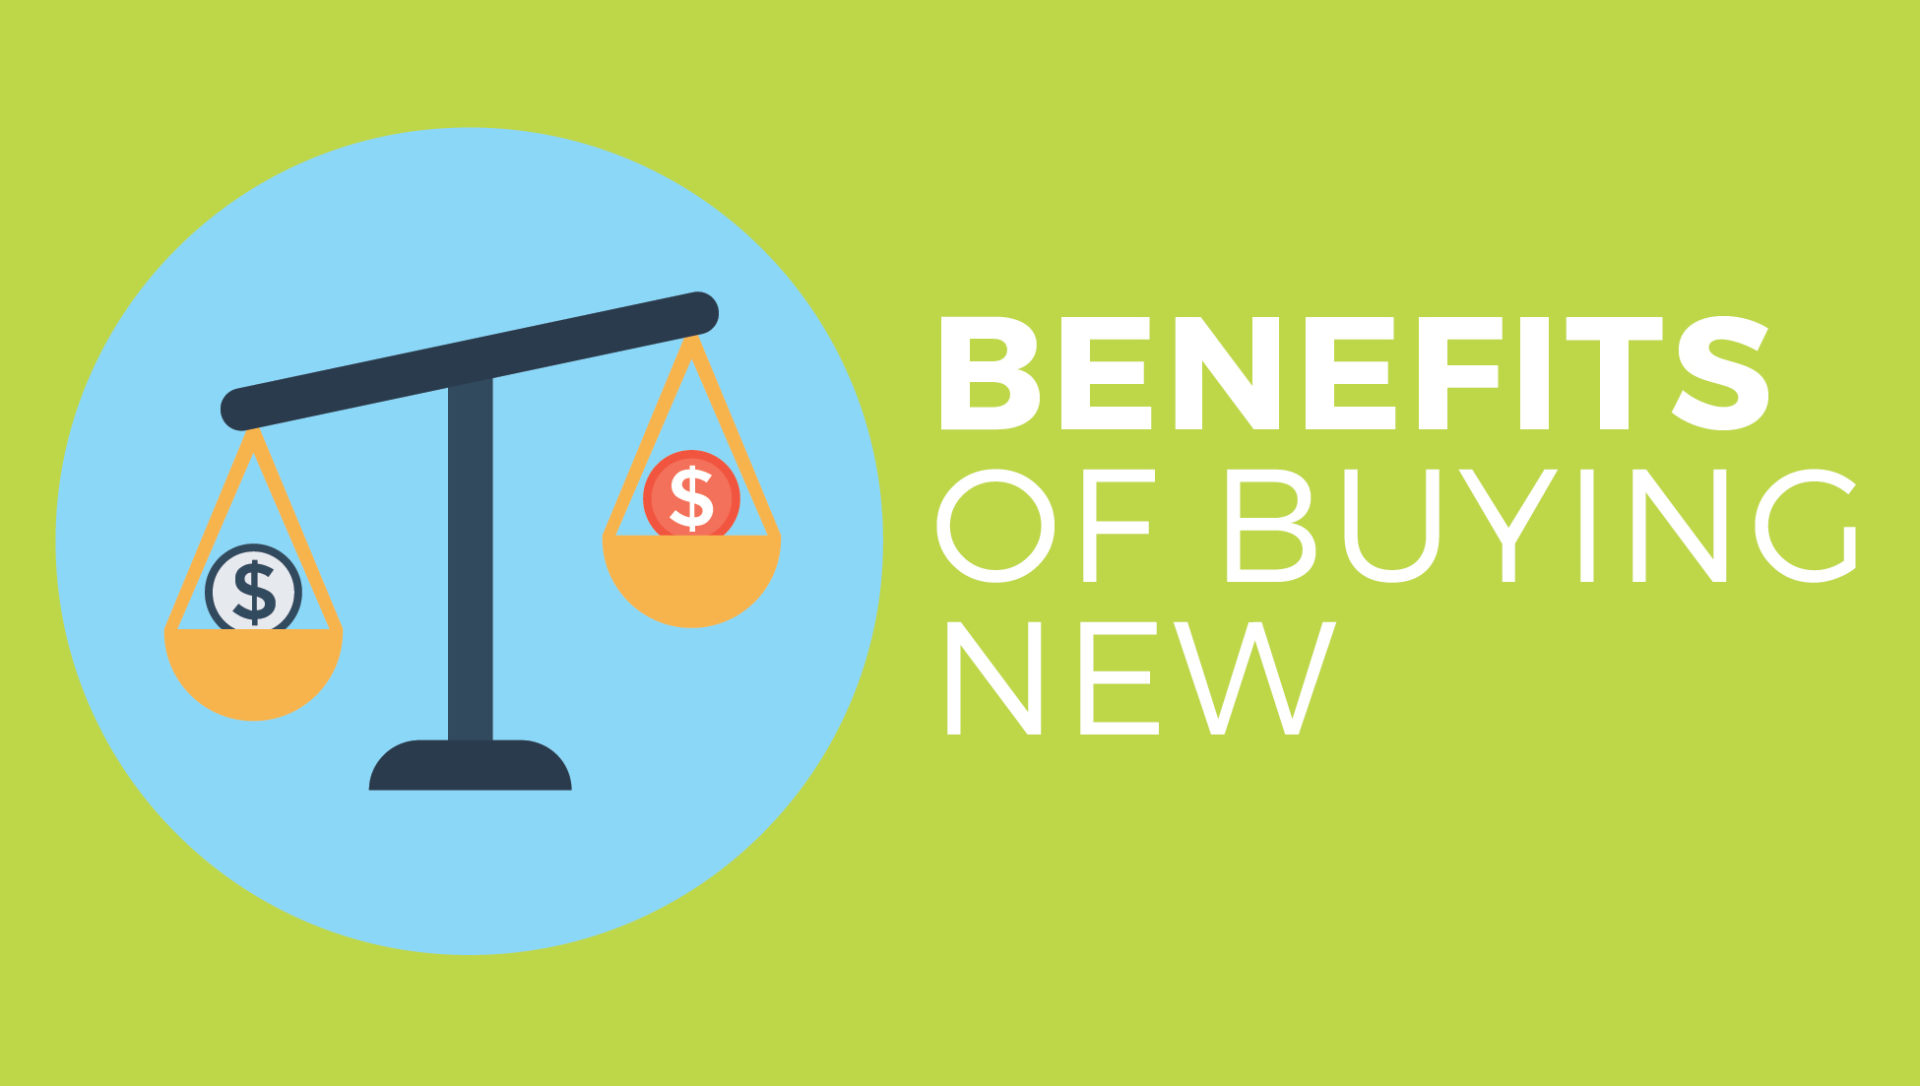 Benefits of buying new